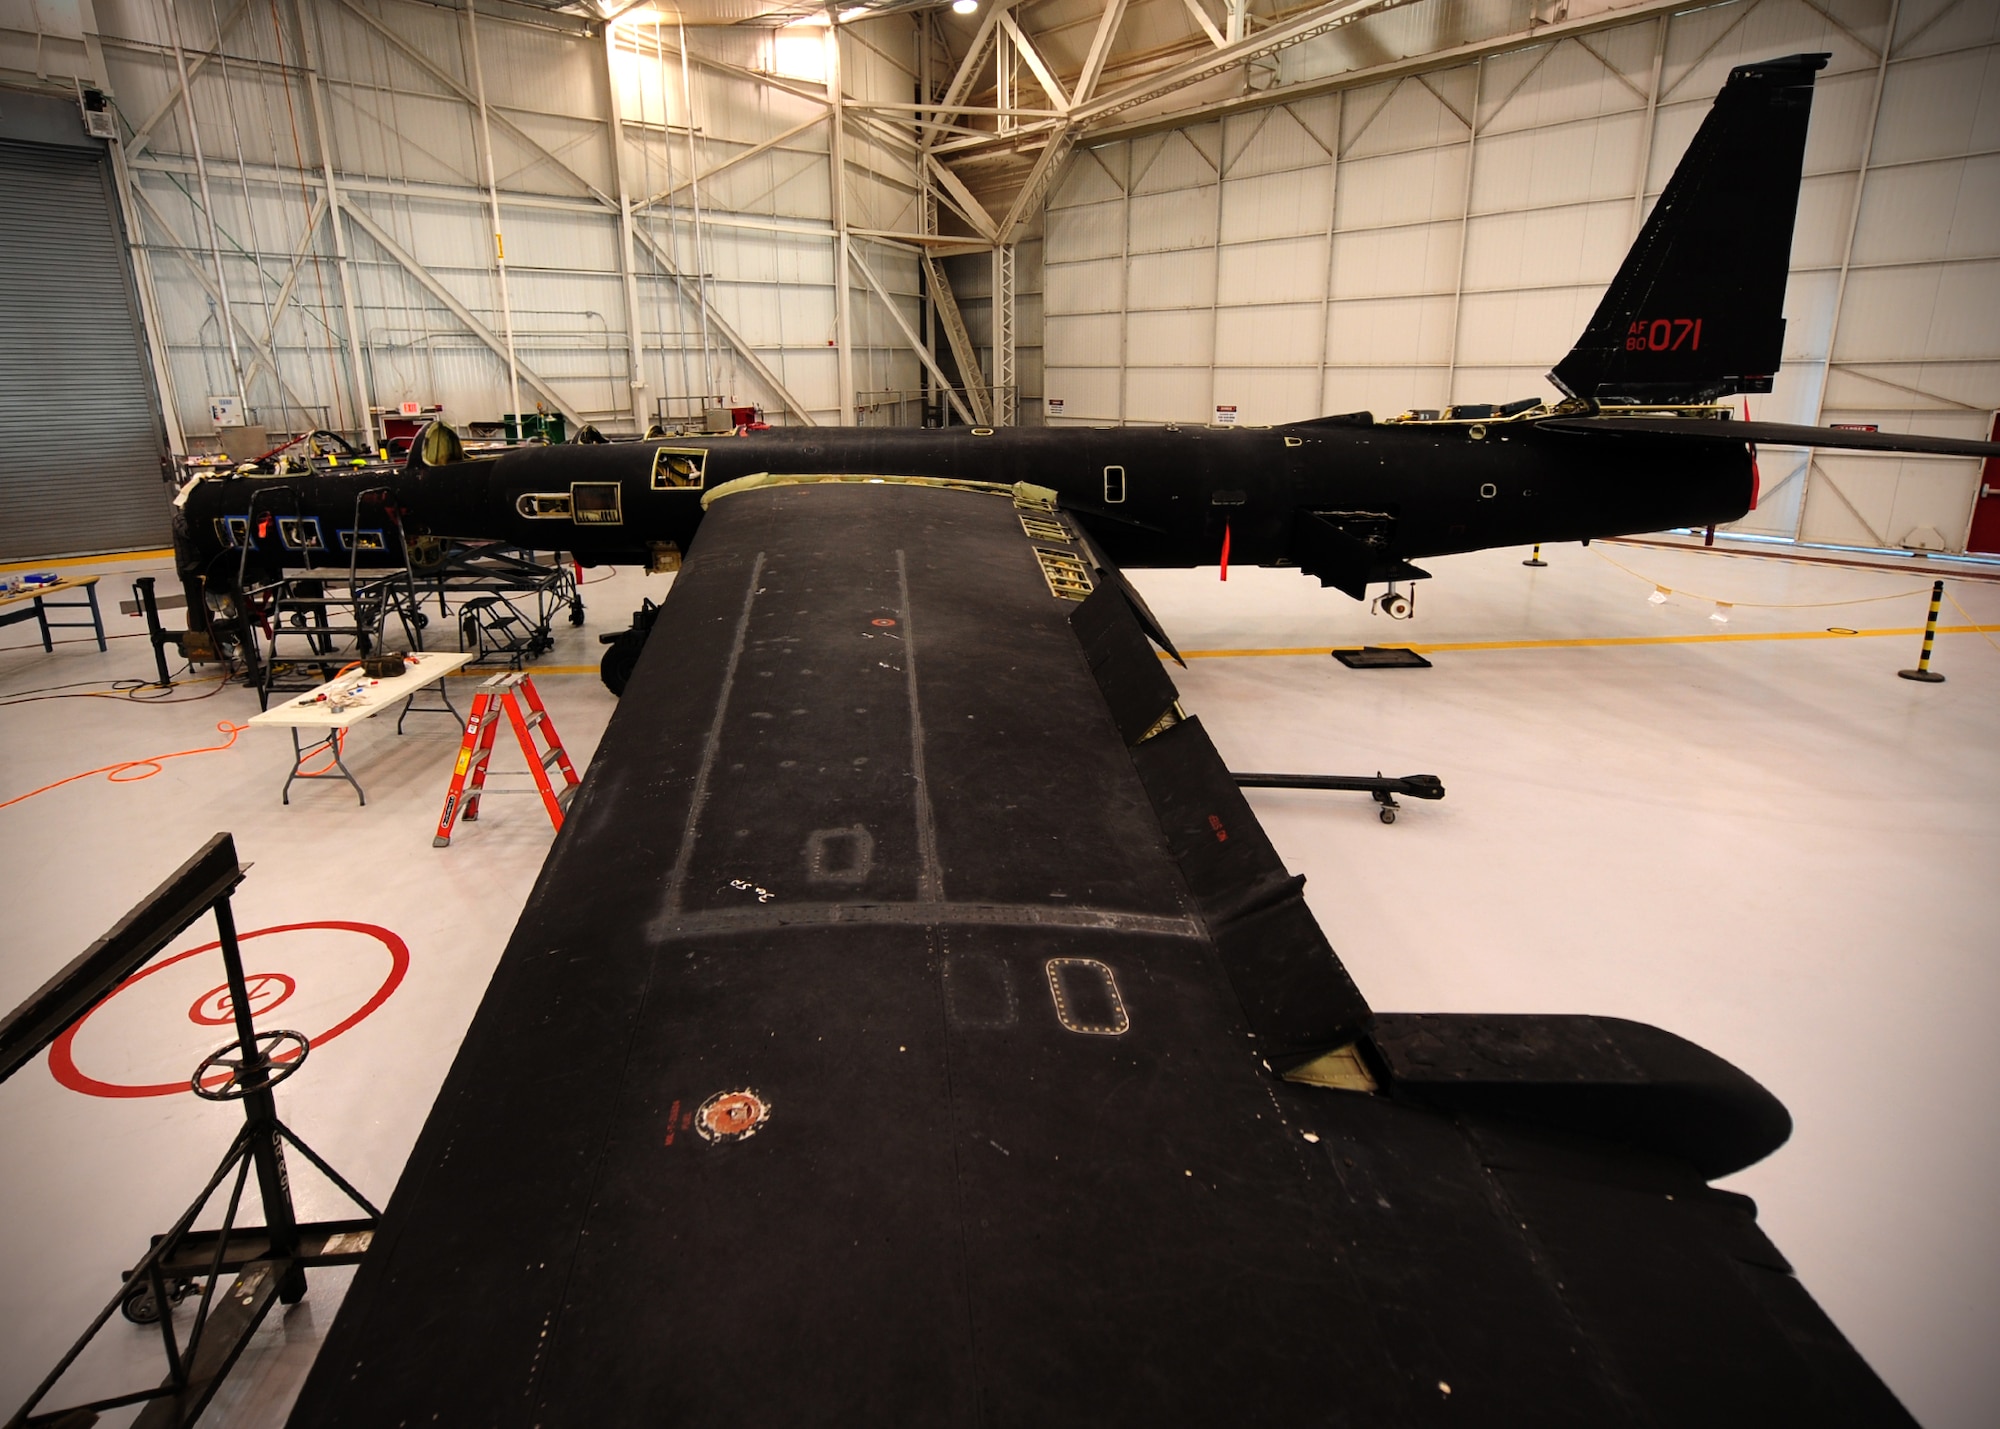 A U-2 Dragon Lady intelligence, surveillance and reconnaissance aircraft sits partially dismantled for Cockpit Altitude Reduction Effort modifications in a phase dock at Beale Air Force Base, Calif., Feb. 14, 2013. The upgrades will almost double the cabin pressure from 3.88 to 7.65 pounds per square inch, improving pilot safety and comfort. (U.S. Air Force photo by Senior Airman Shawn Nickel/Released)